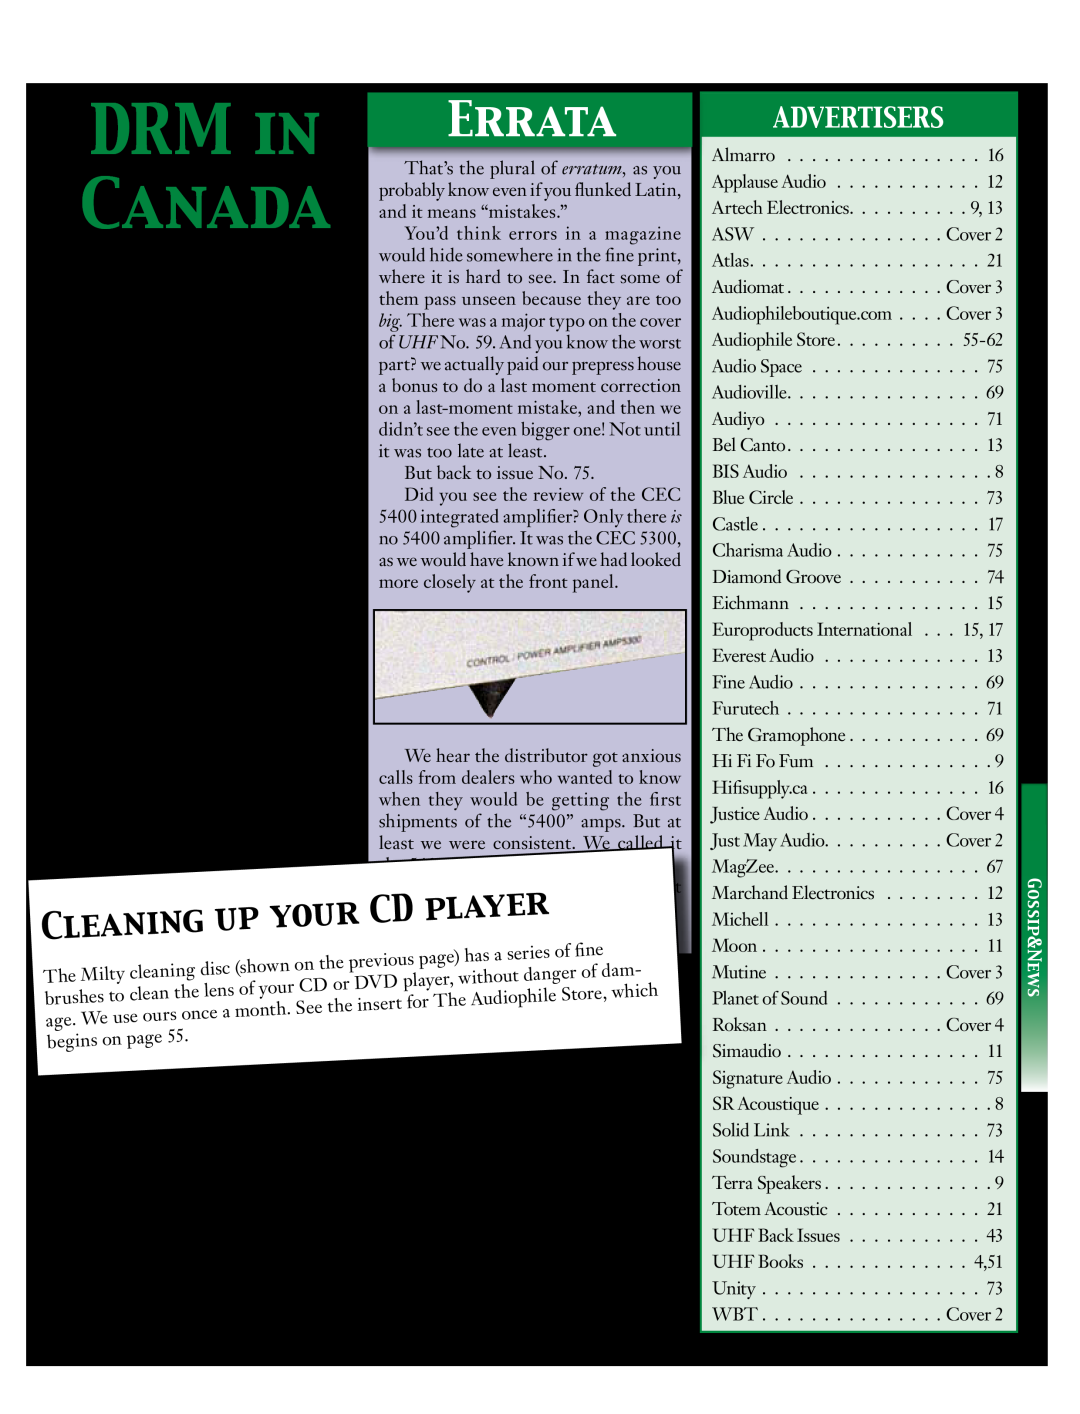 Koss 76 manual Cleaning Up Your Cd, Drm In Canada, Errata, Player, Advertisers 